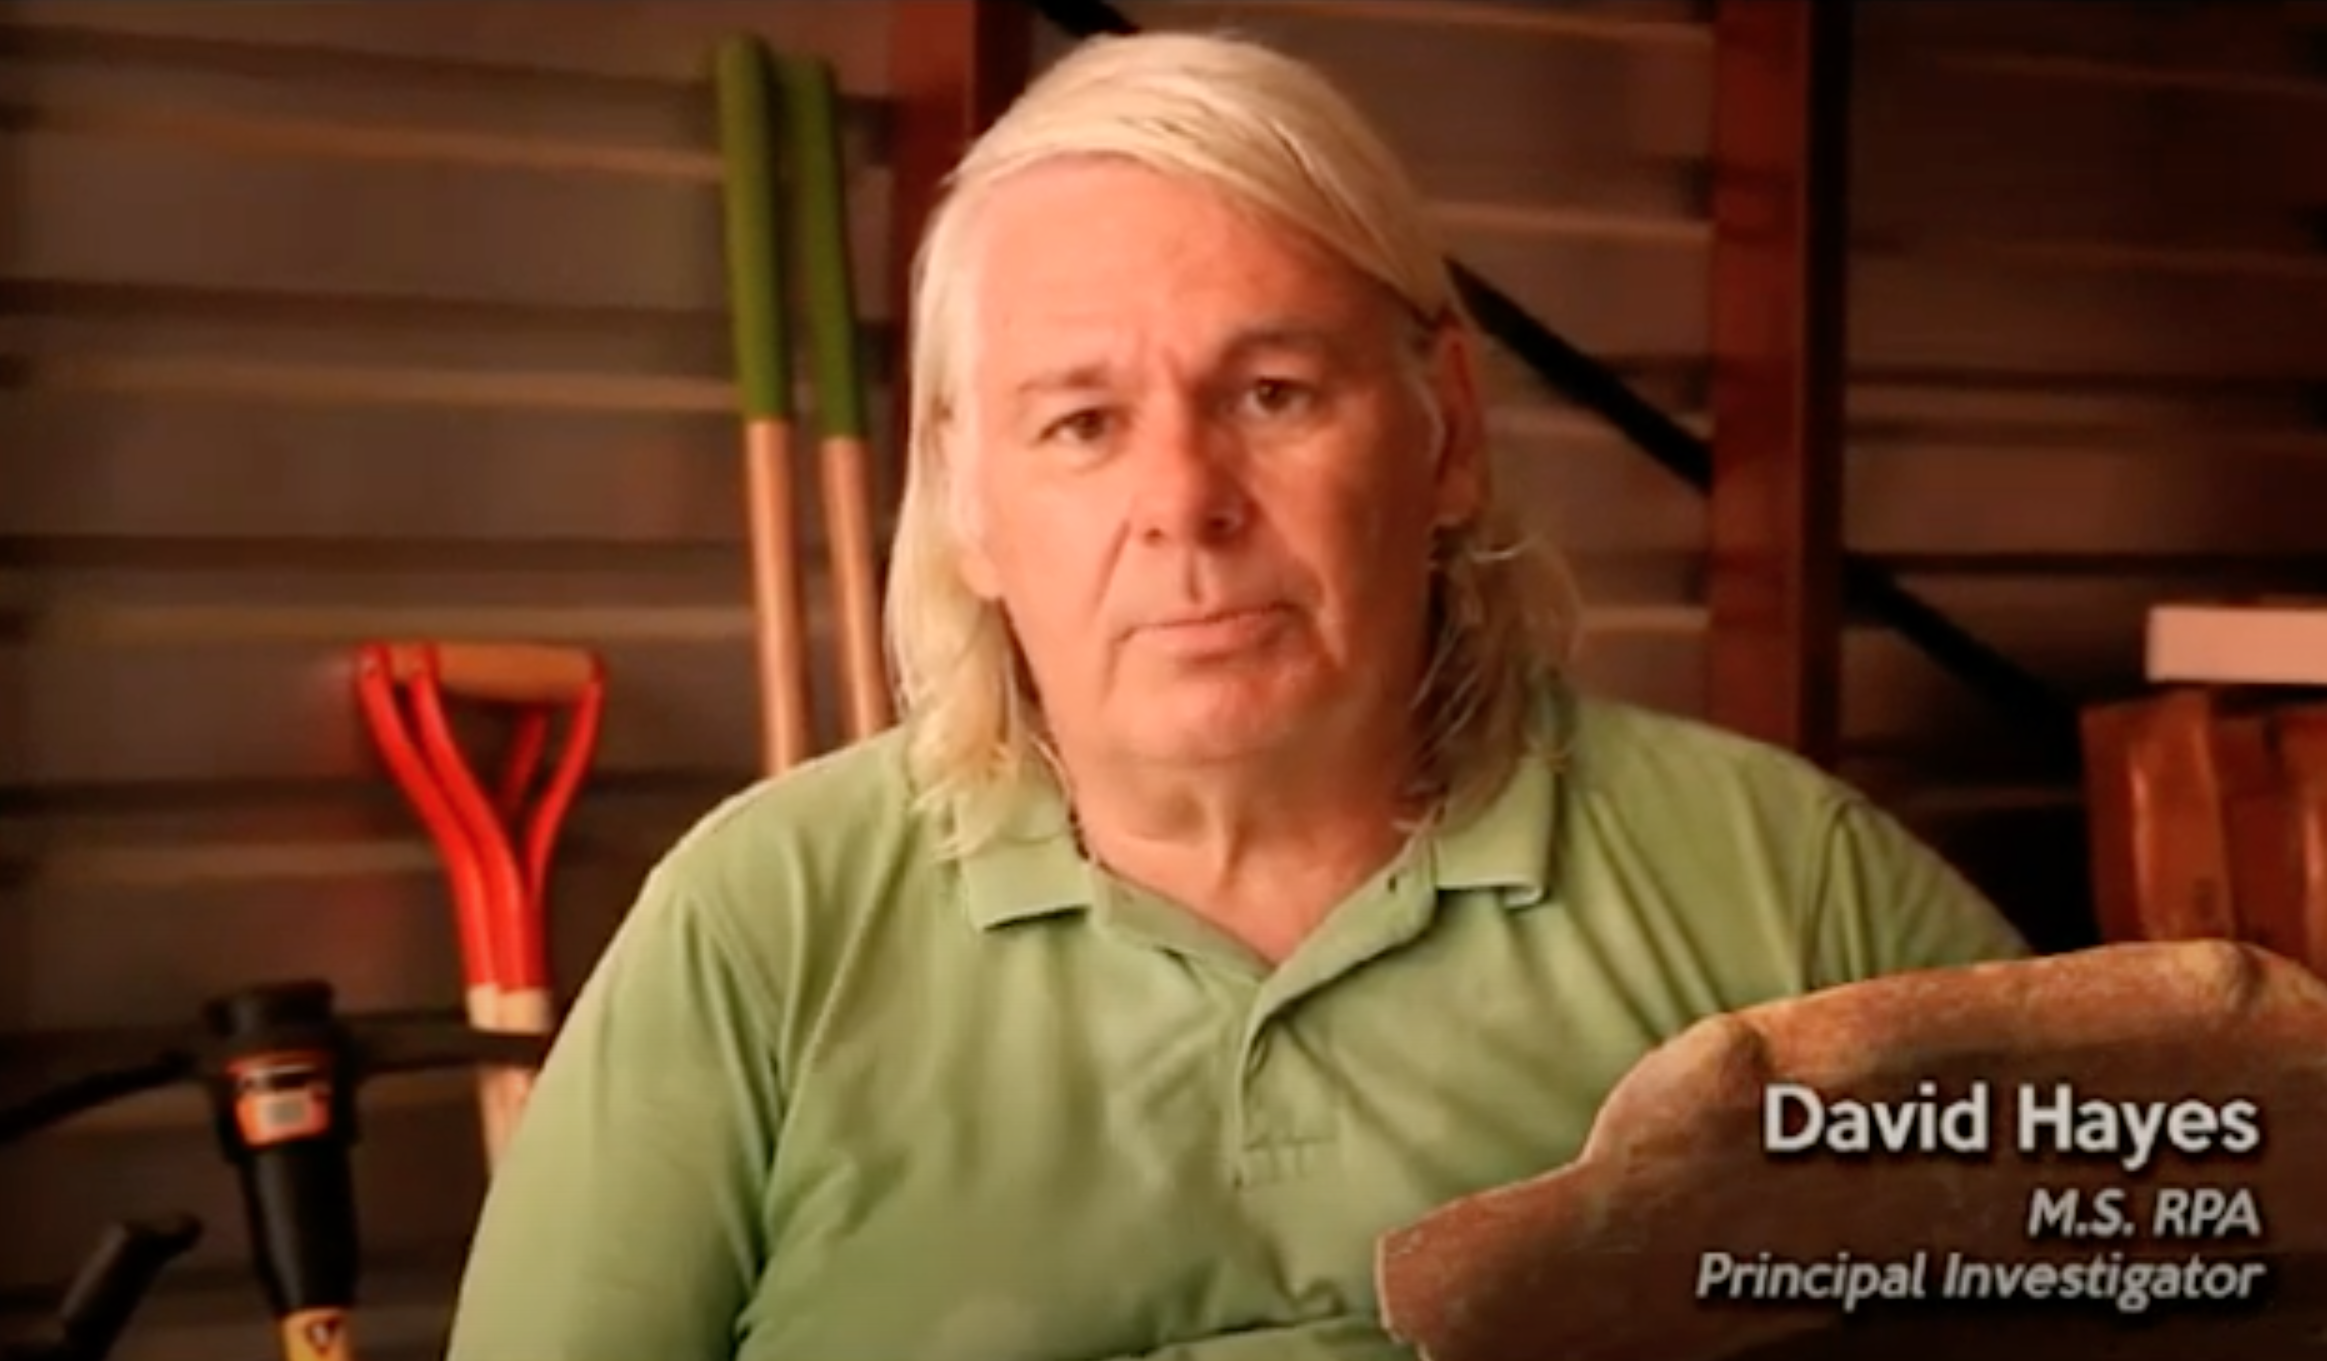 David Hayes led the archaeological excavation of Main Street in 2014. (Screenshot from the Charlotte Amalie Saladoid Excavation documentary)